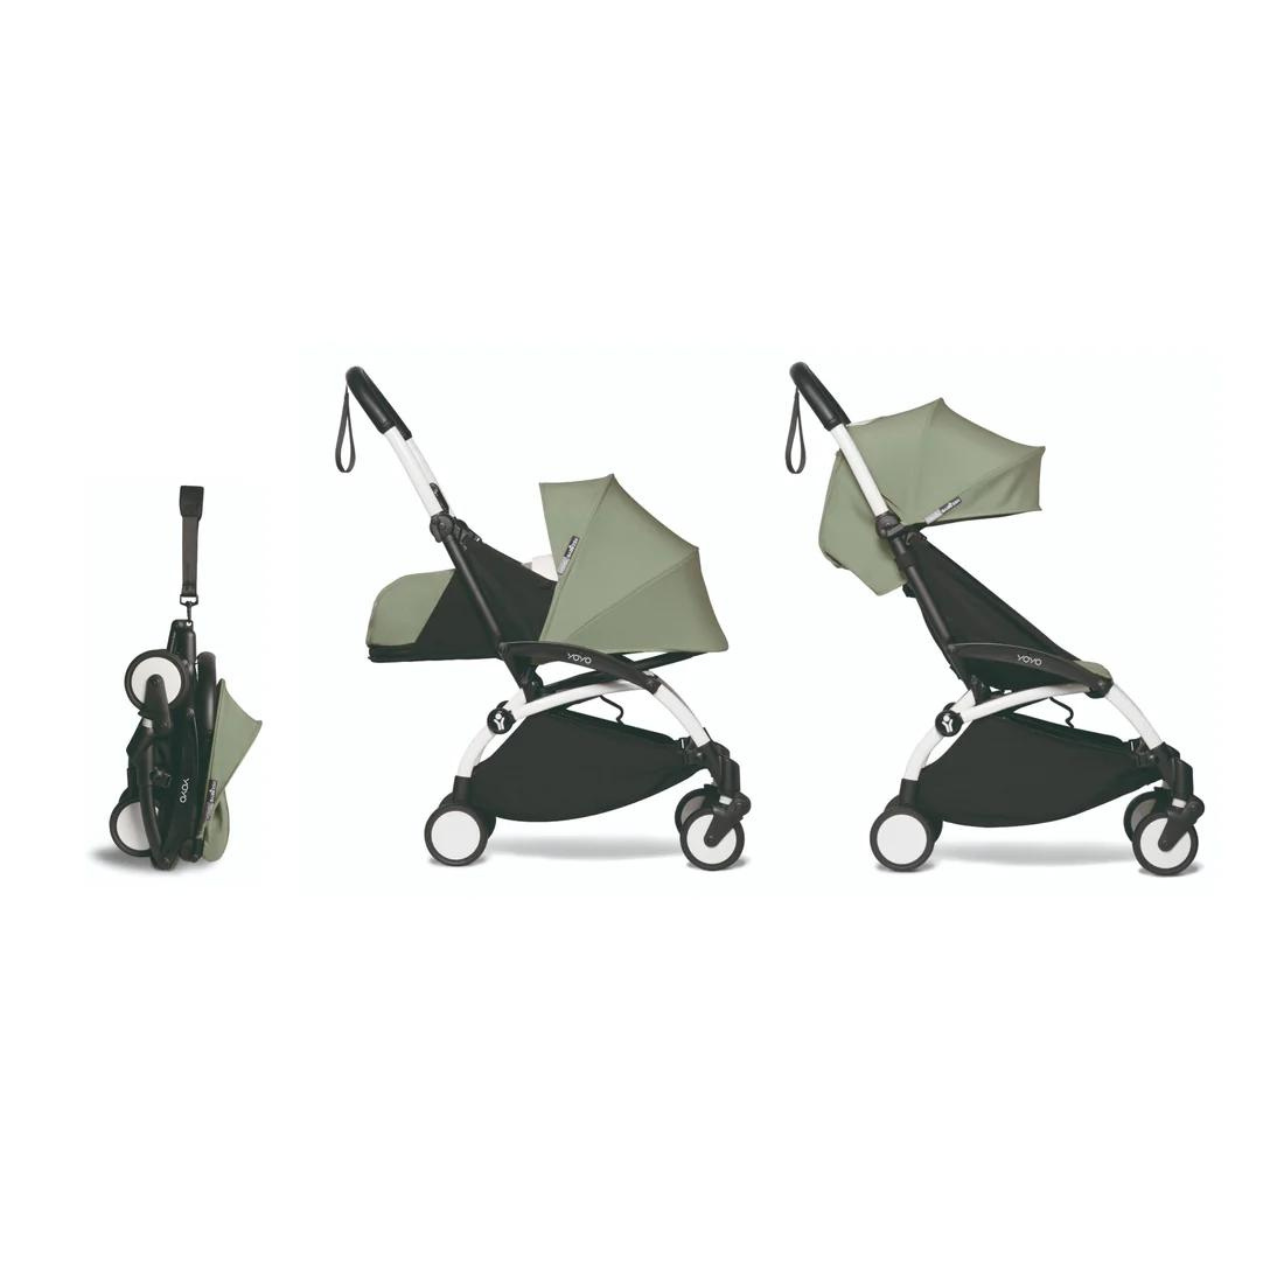  Xe đẩy BABYZEN YOYO² /  0+ 6+ Baby Stroller Complete Set ( Khung Trắng ) 